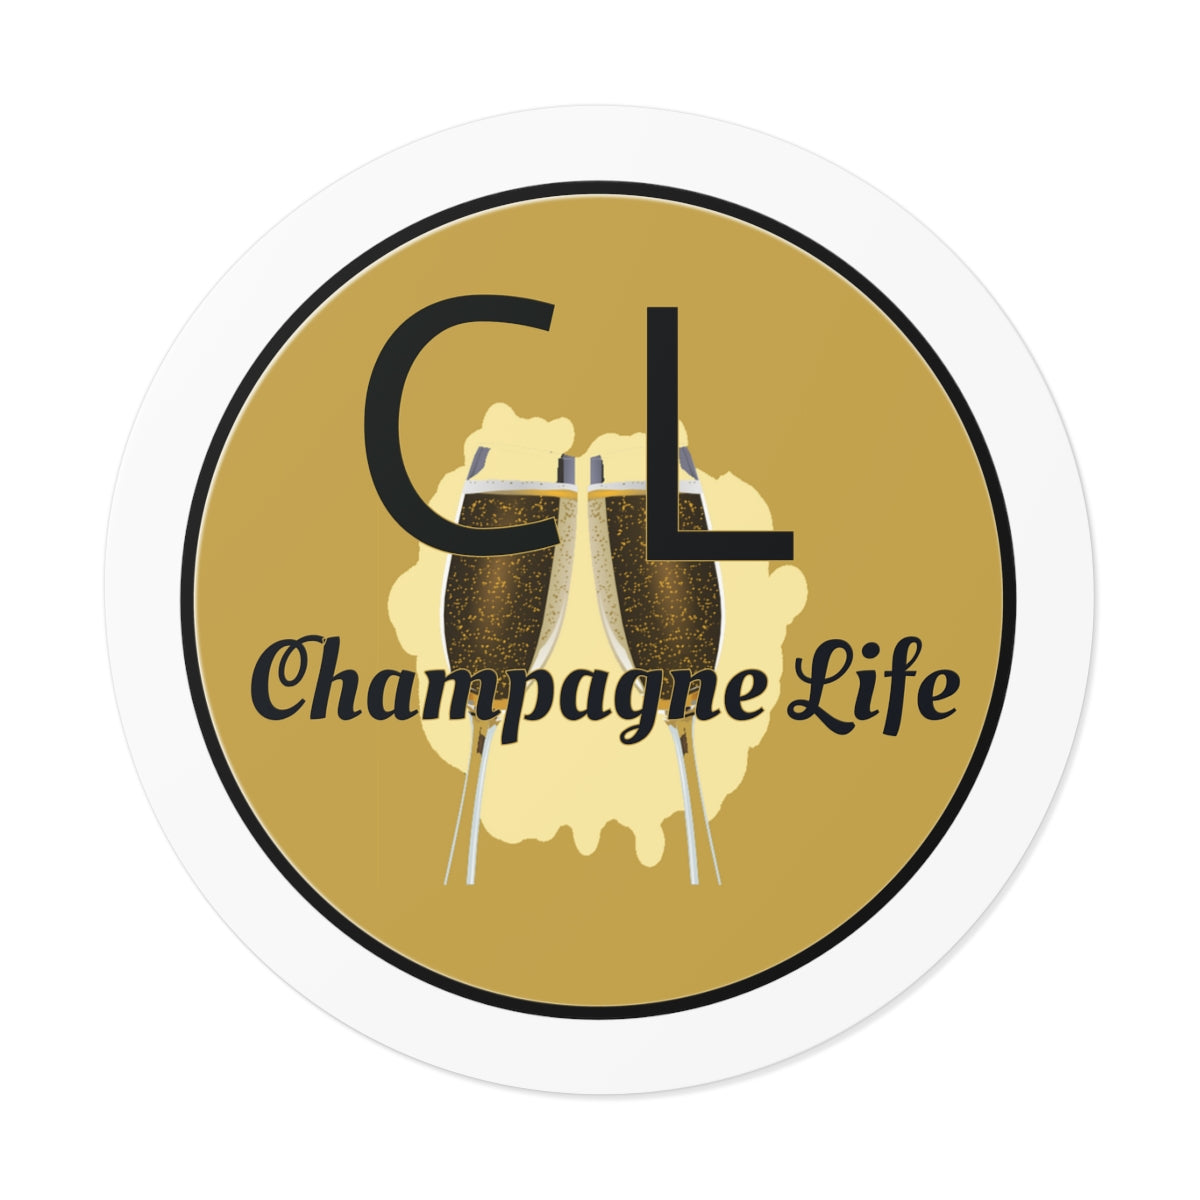 Champagne Life Circle with Gold Background Round Vinyl Stickers